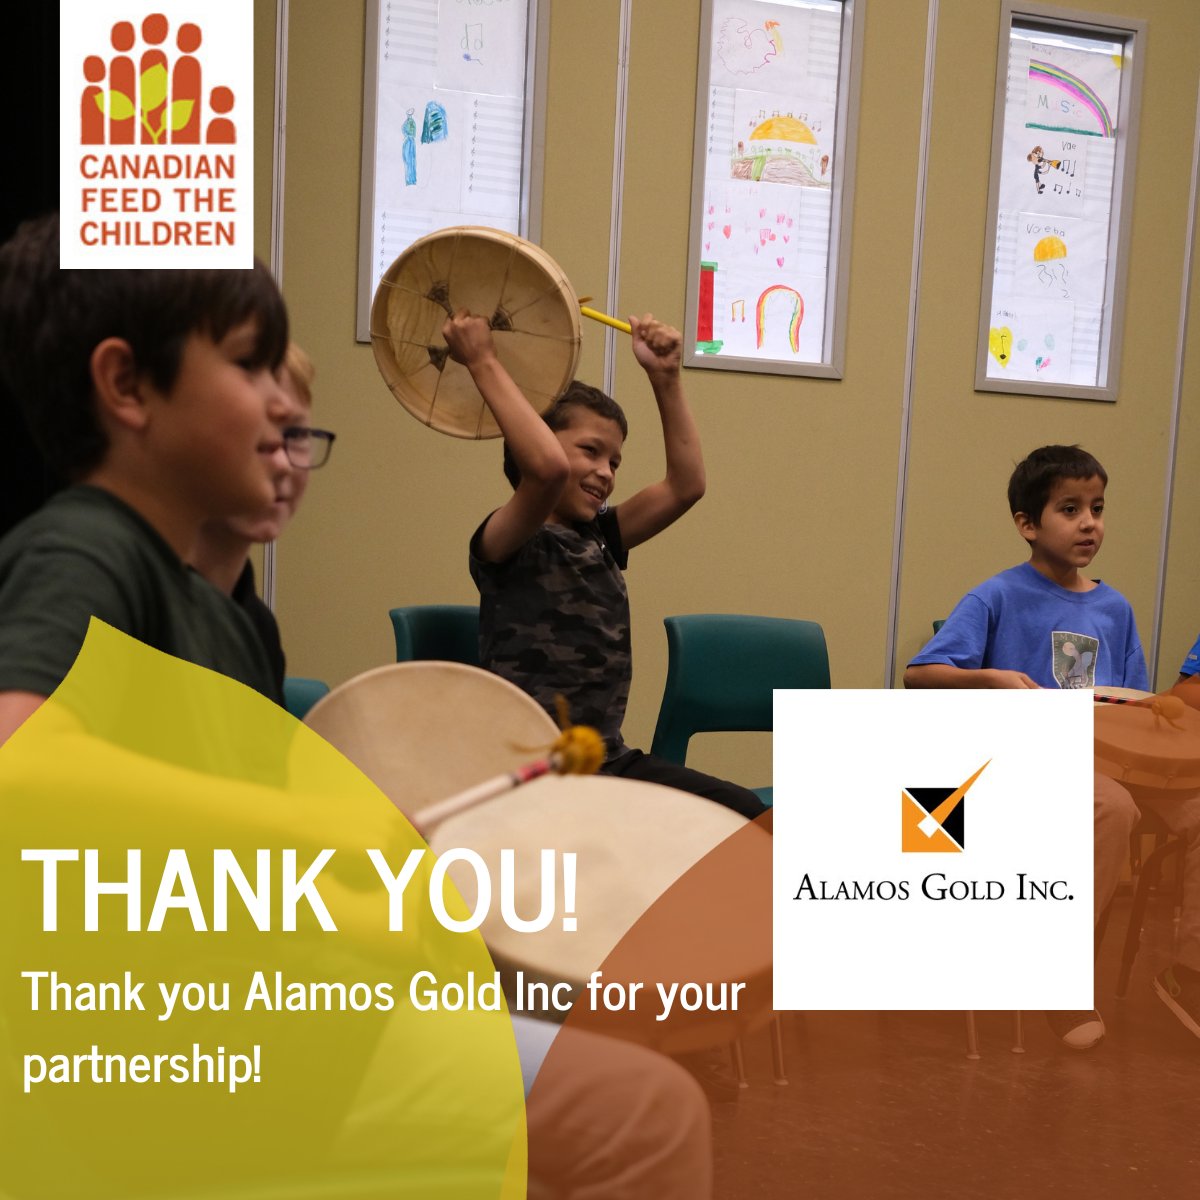 #ThankYouThursday to @AlamosGoldInc for your support of Indigenous communities in Canada. We appreciate your partnership and all that you do to help children, families and communities thrive!